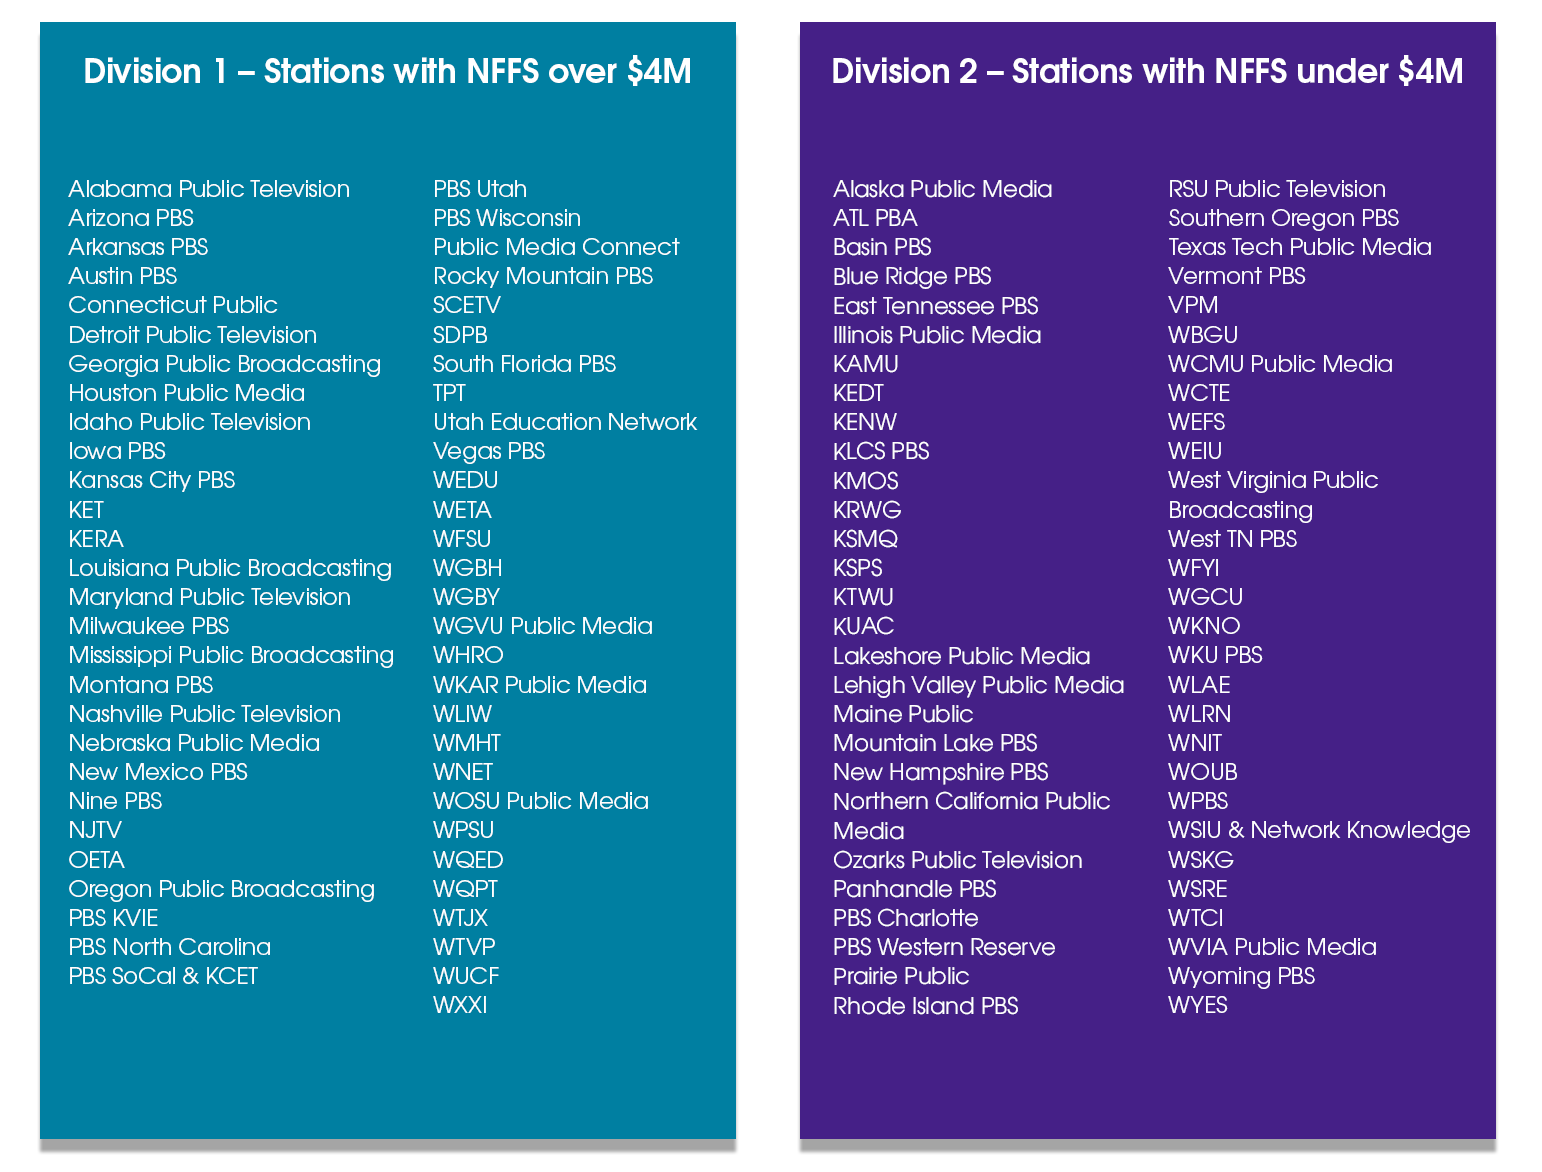 List of stations by division